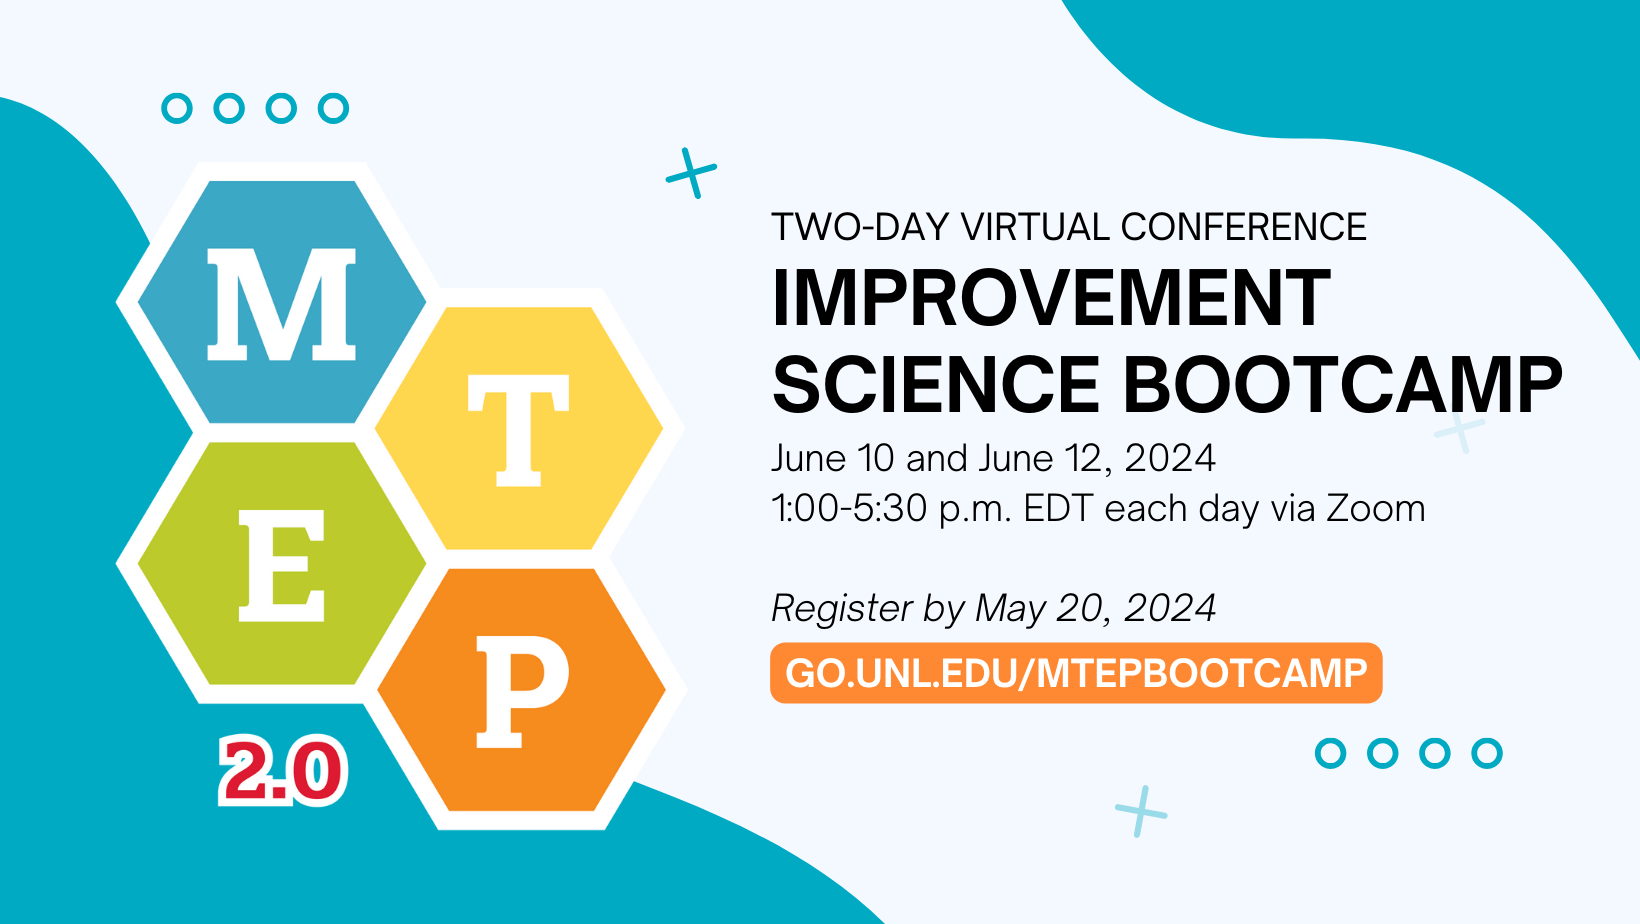 Register for the MTEP 2.0 Improvement Science Bootcamp by May 20: https://forms.gle/XtBrYX83LS1EBvhW9